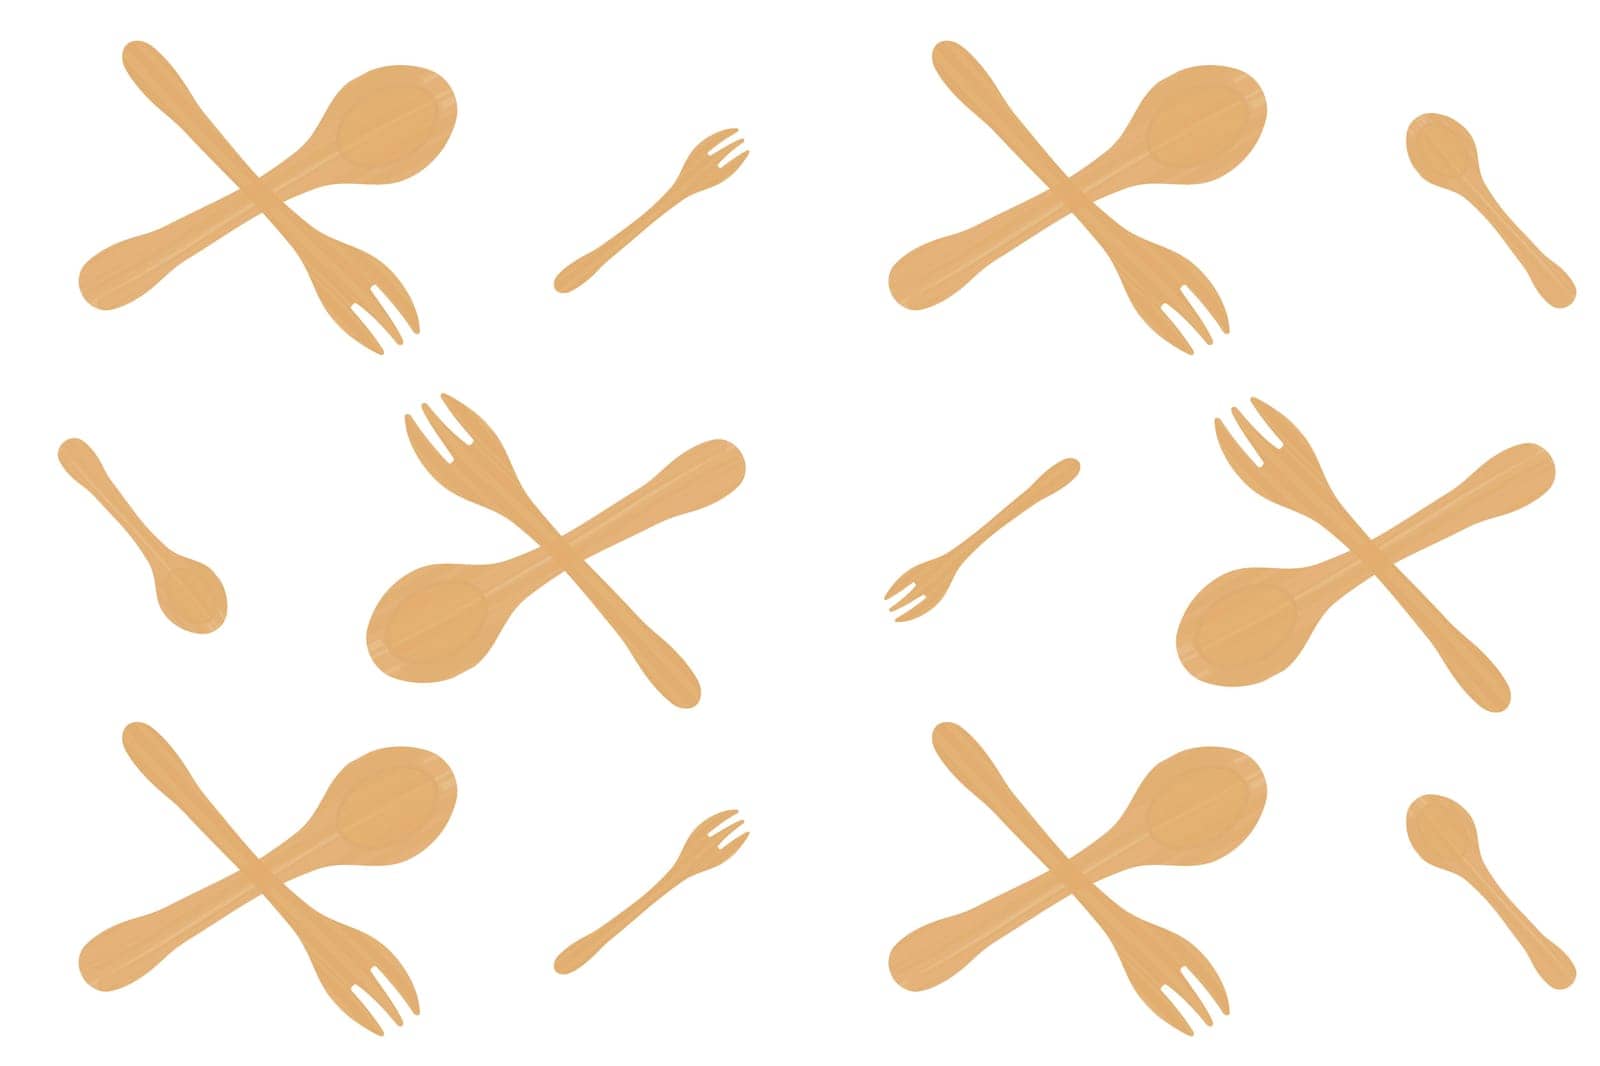 Pattern of wooden bamboo spoons and forks on a white background. The concept of ecology, environmental protection, waste recycling. Vector image.